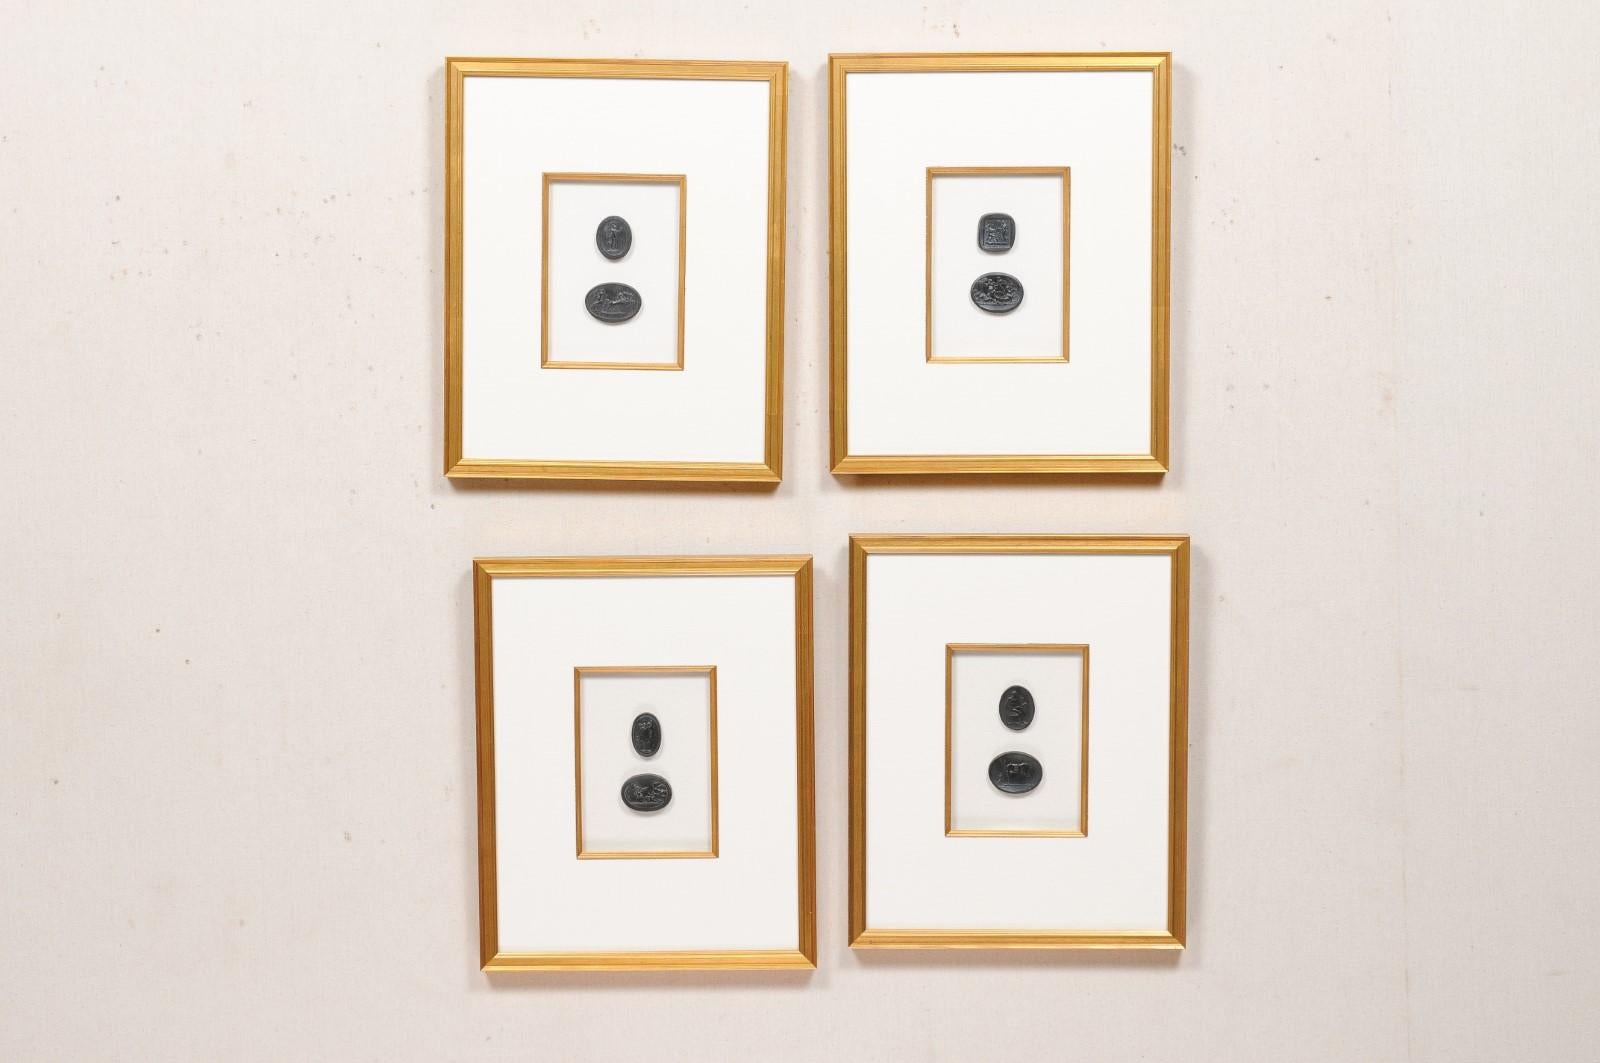 A collection of four art pieces of black intaglio seals, displayed nicely within custom gold toned wooden frames. This set of framed art each features a pair of black colored Italian intaglio seals (contemporary reproductions) which have been set